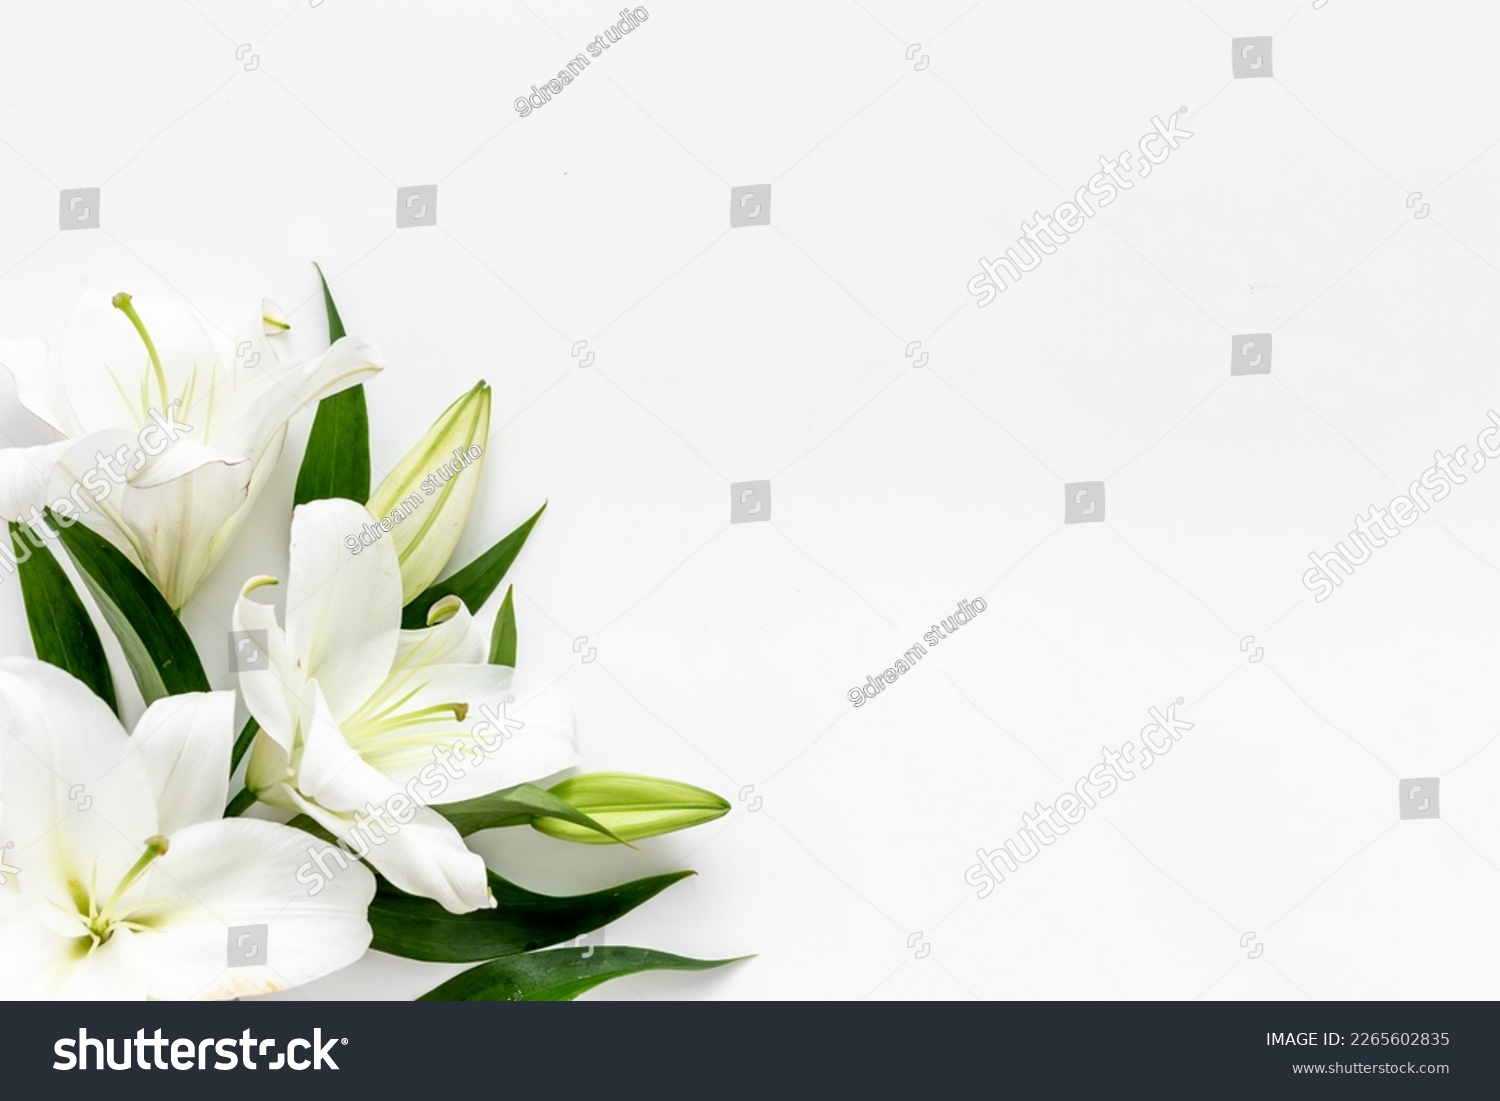 Branch of white lilies flowers. Mourning or funeral background. #2265602835